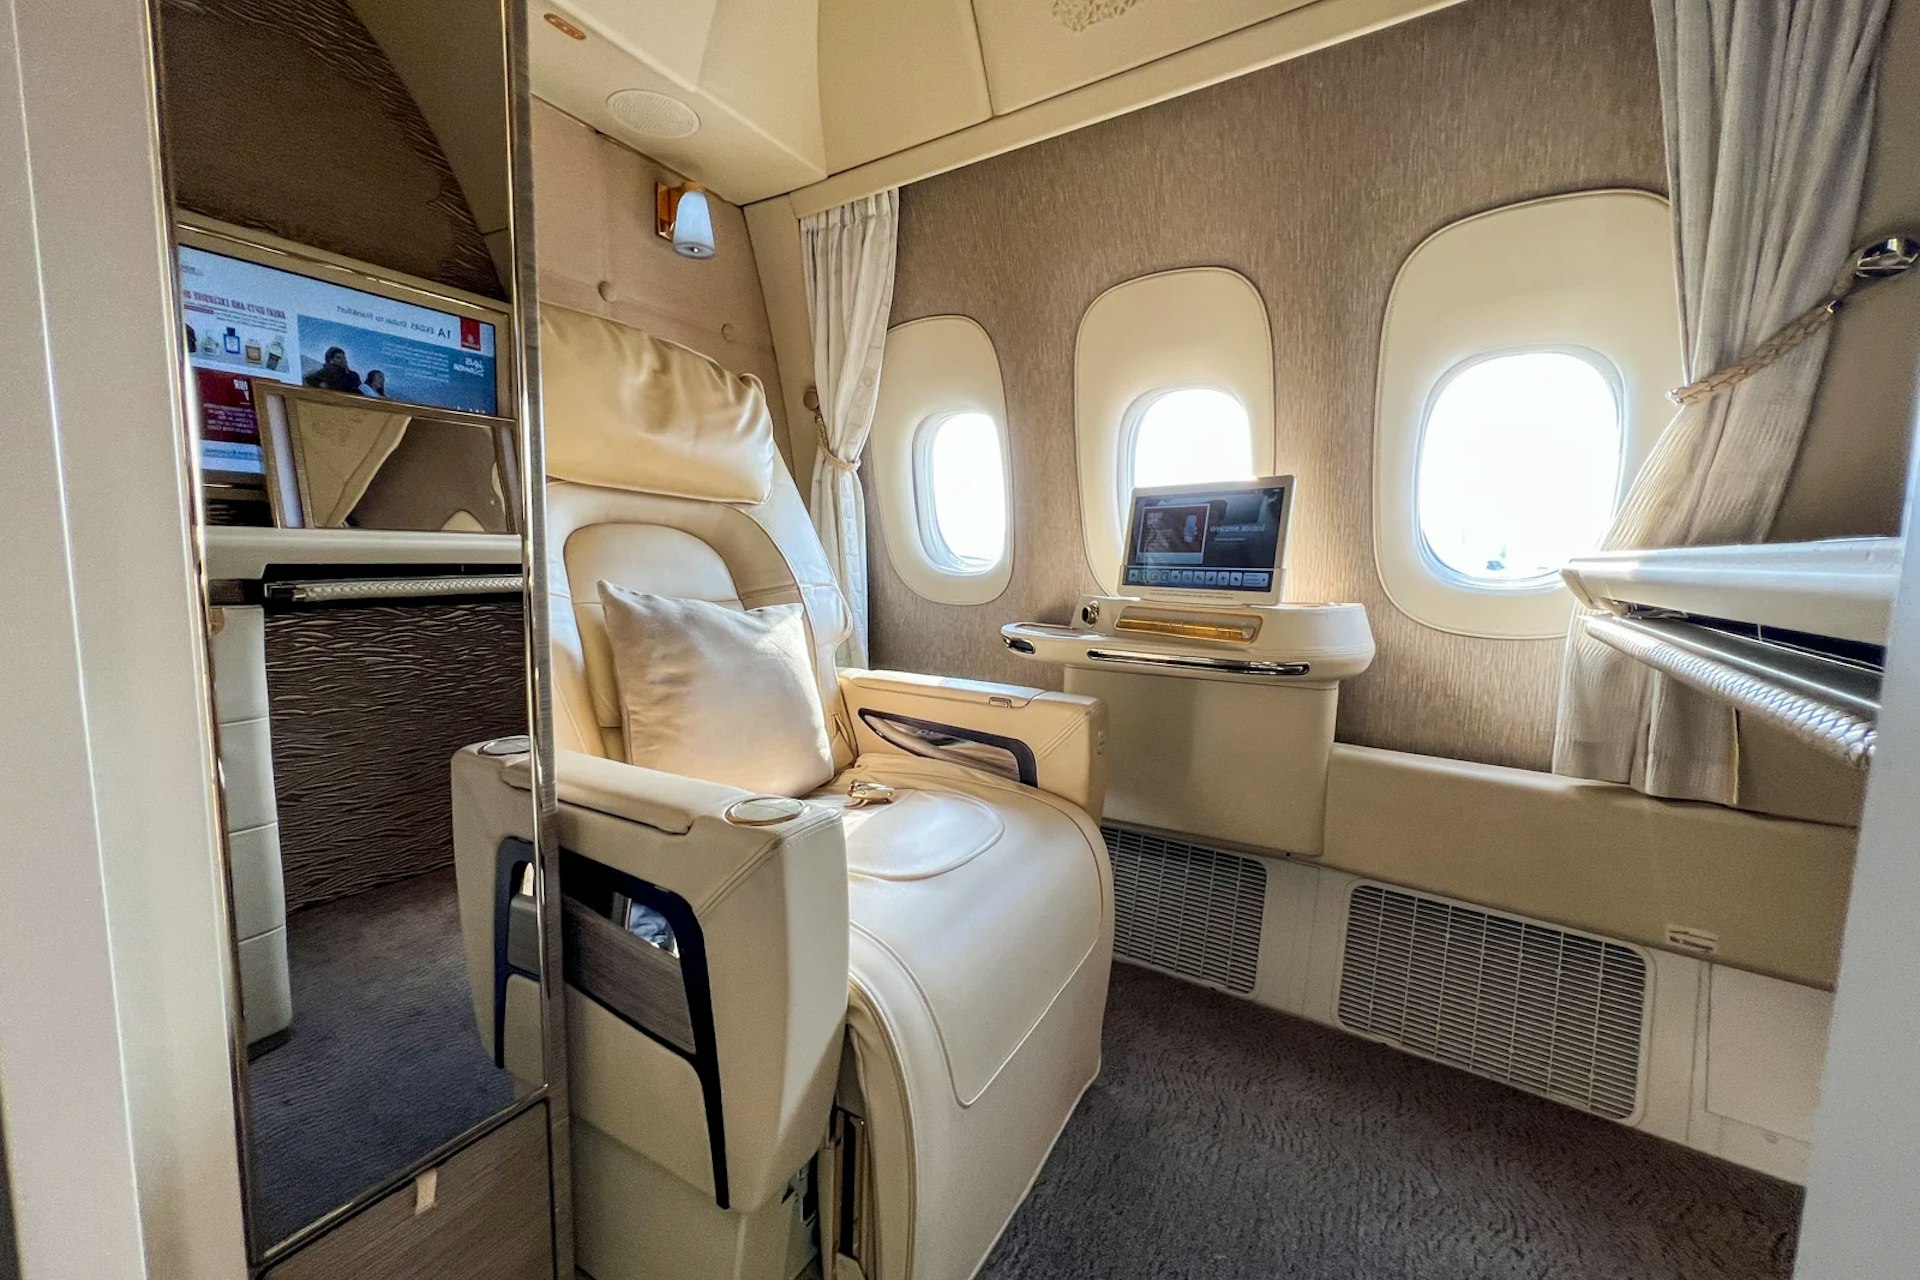 The luxurious first-class cabin onboard the Emirates 777